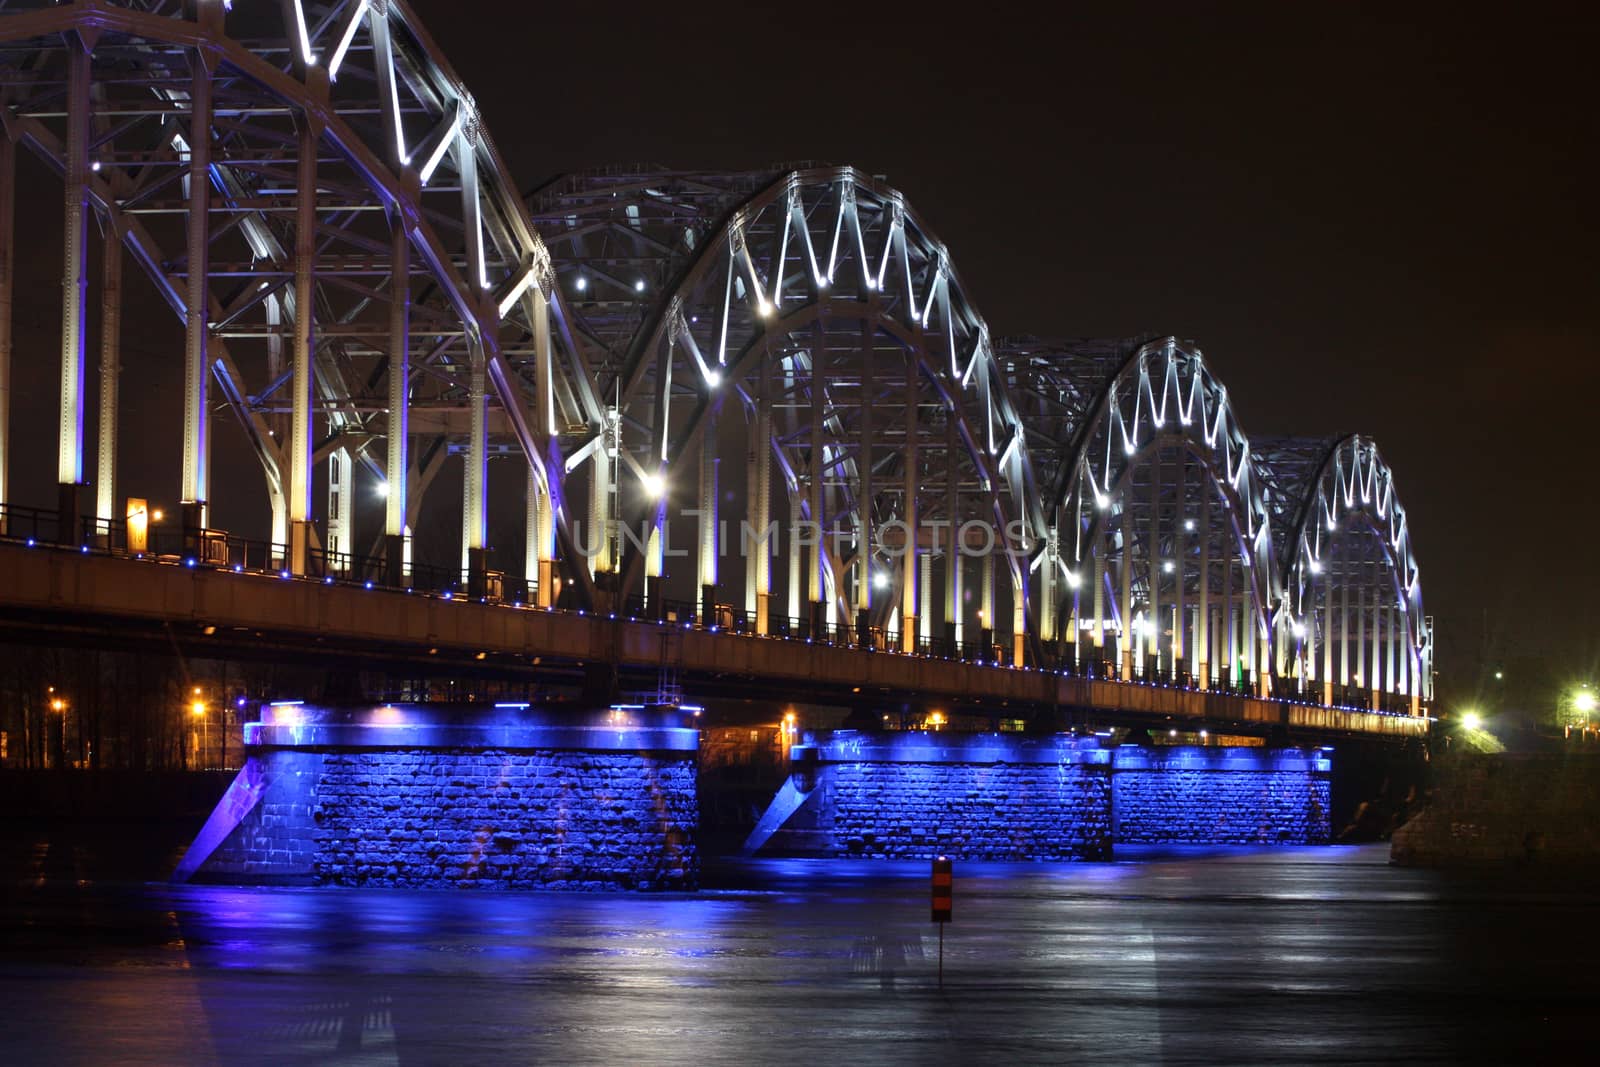 Railway bridge at night with white-blue illumination, reflection in the river